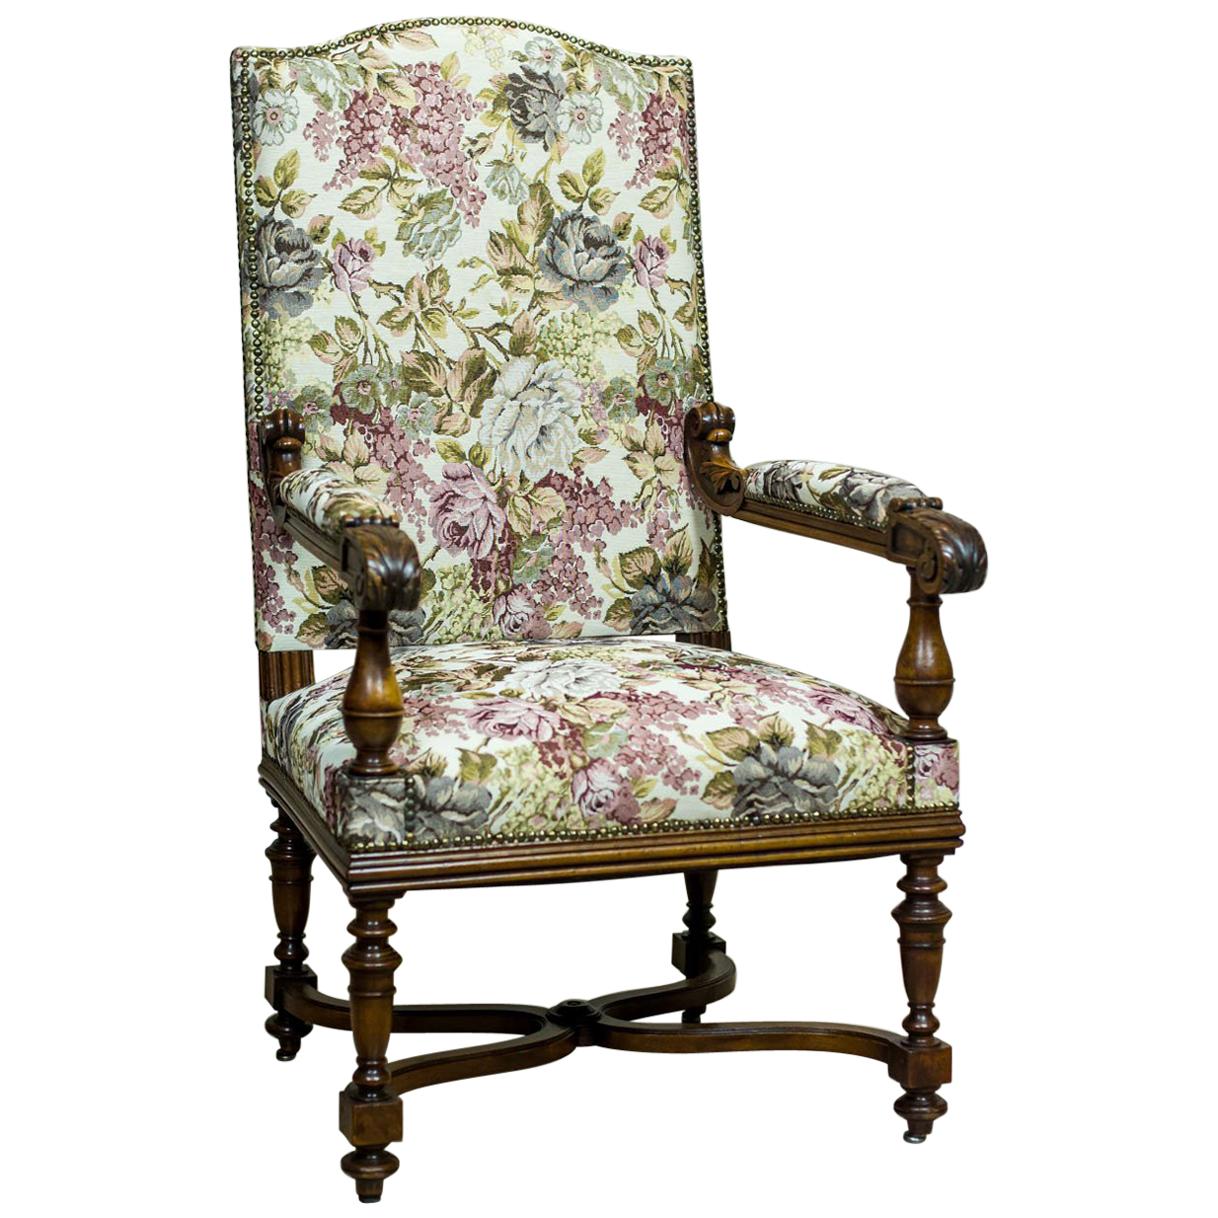 French Oak Armchair/Throne from the Turn of the 19th and 20th Centuries For Sale